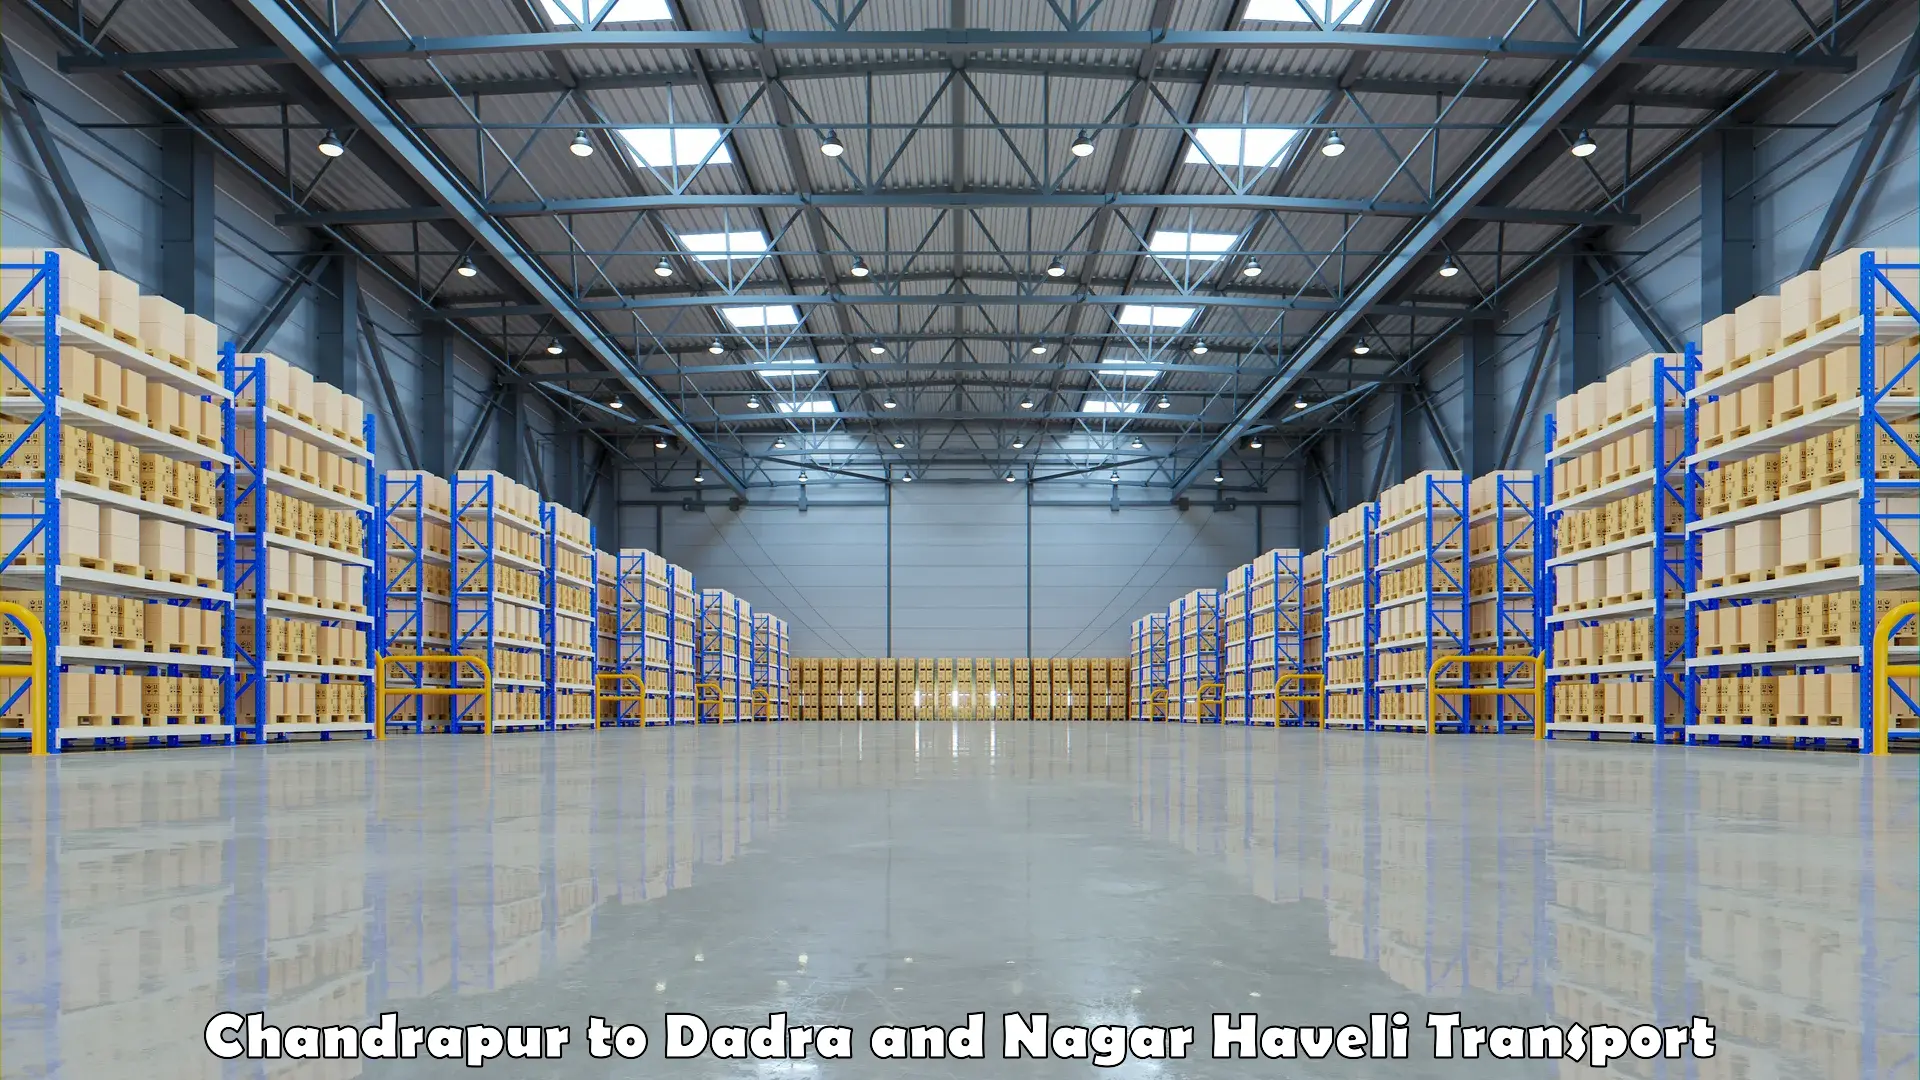 Goods delivery service Chandrapur to Dadra and Nagar Haveli